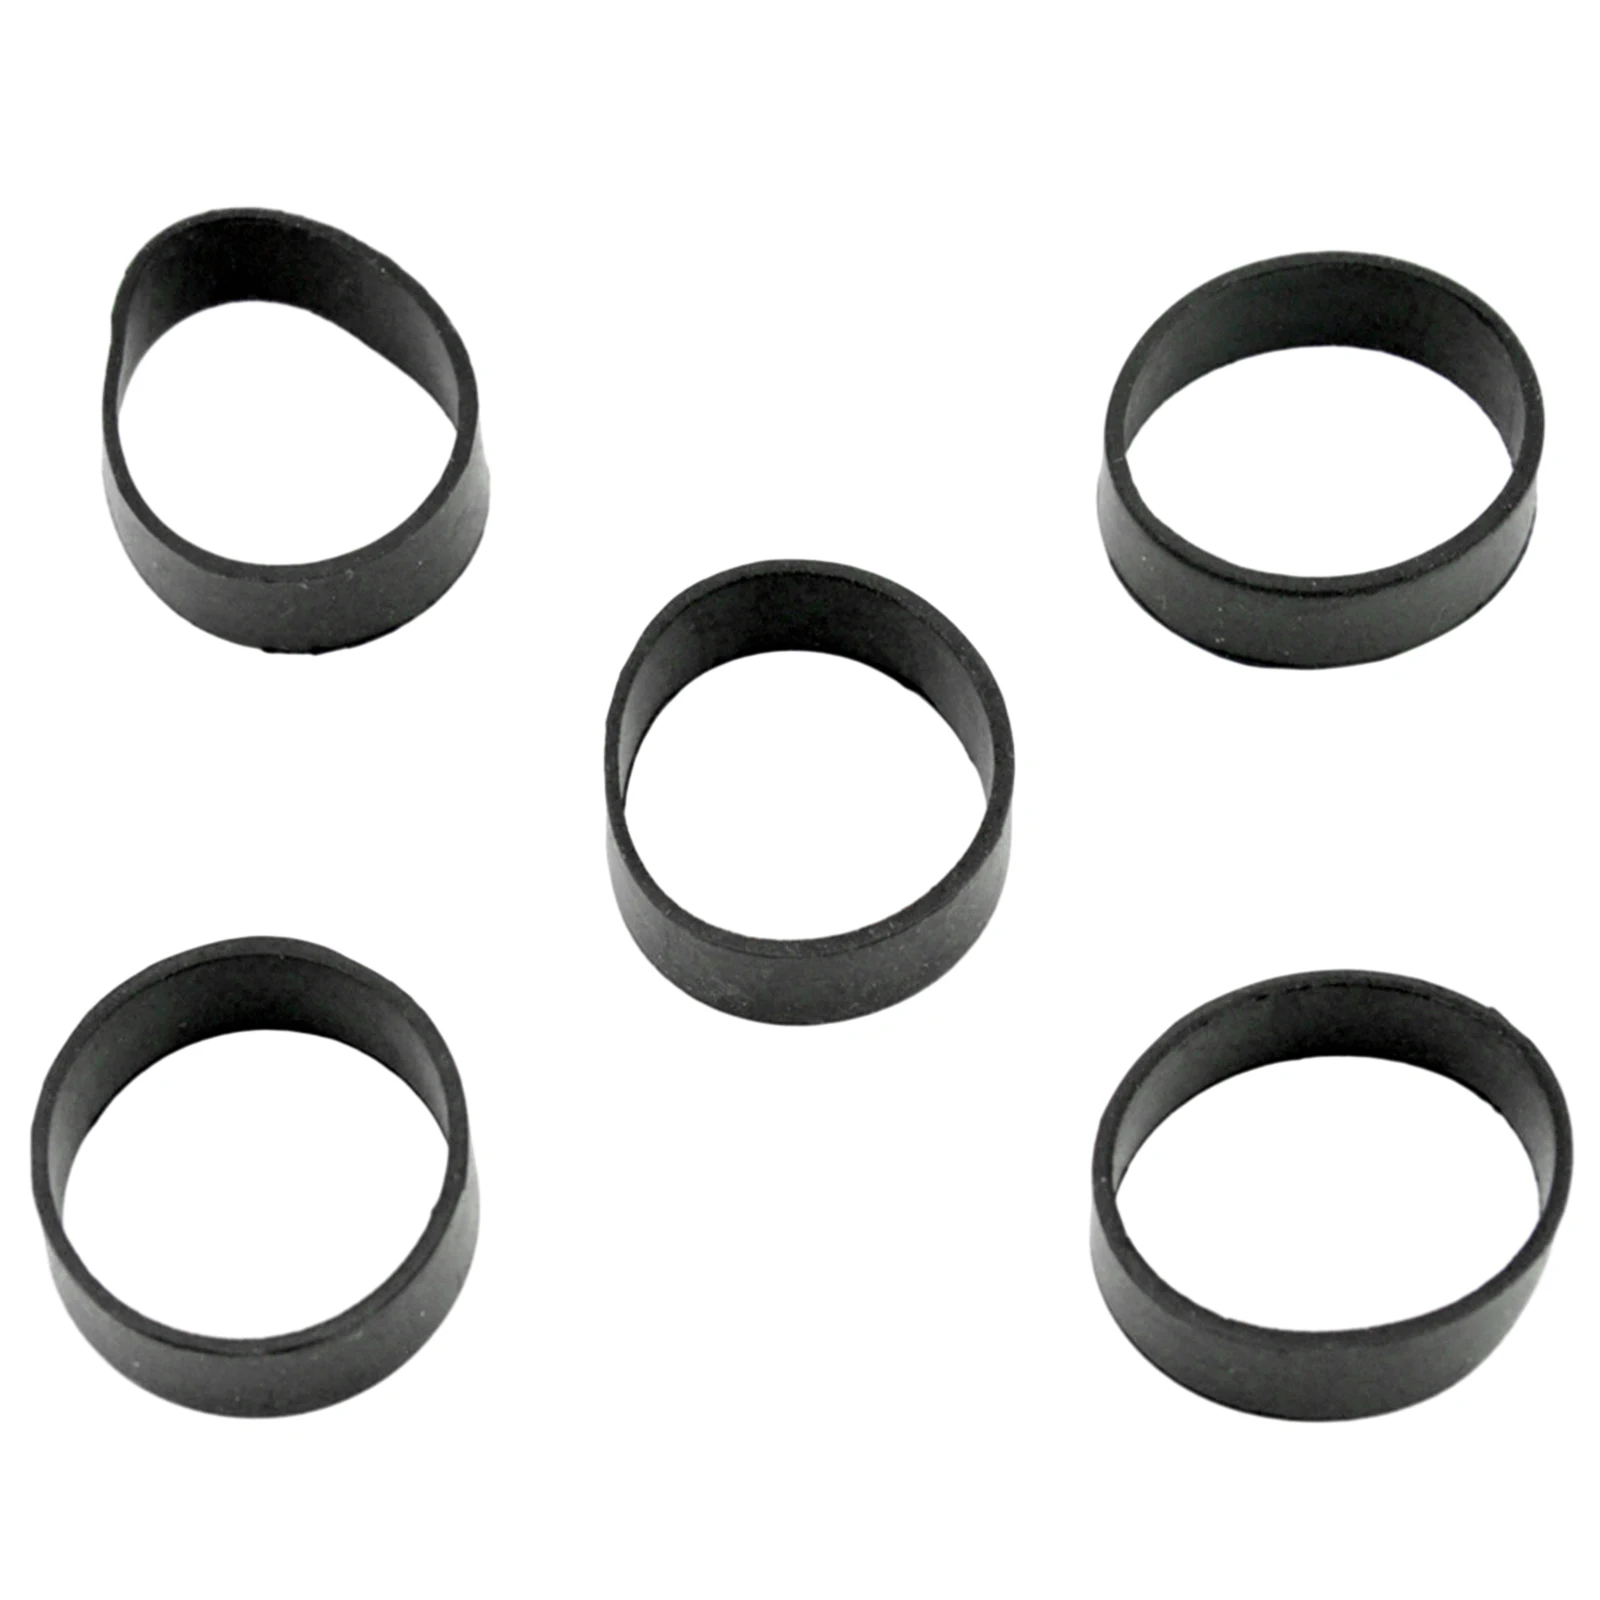 

Ring Diving Rubber Bands 5 Pieces Of Black Fixed Rubber Ring Inner Diameter 32MM Provide A Secure Webbing Brand New